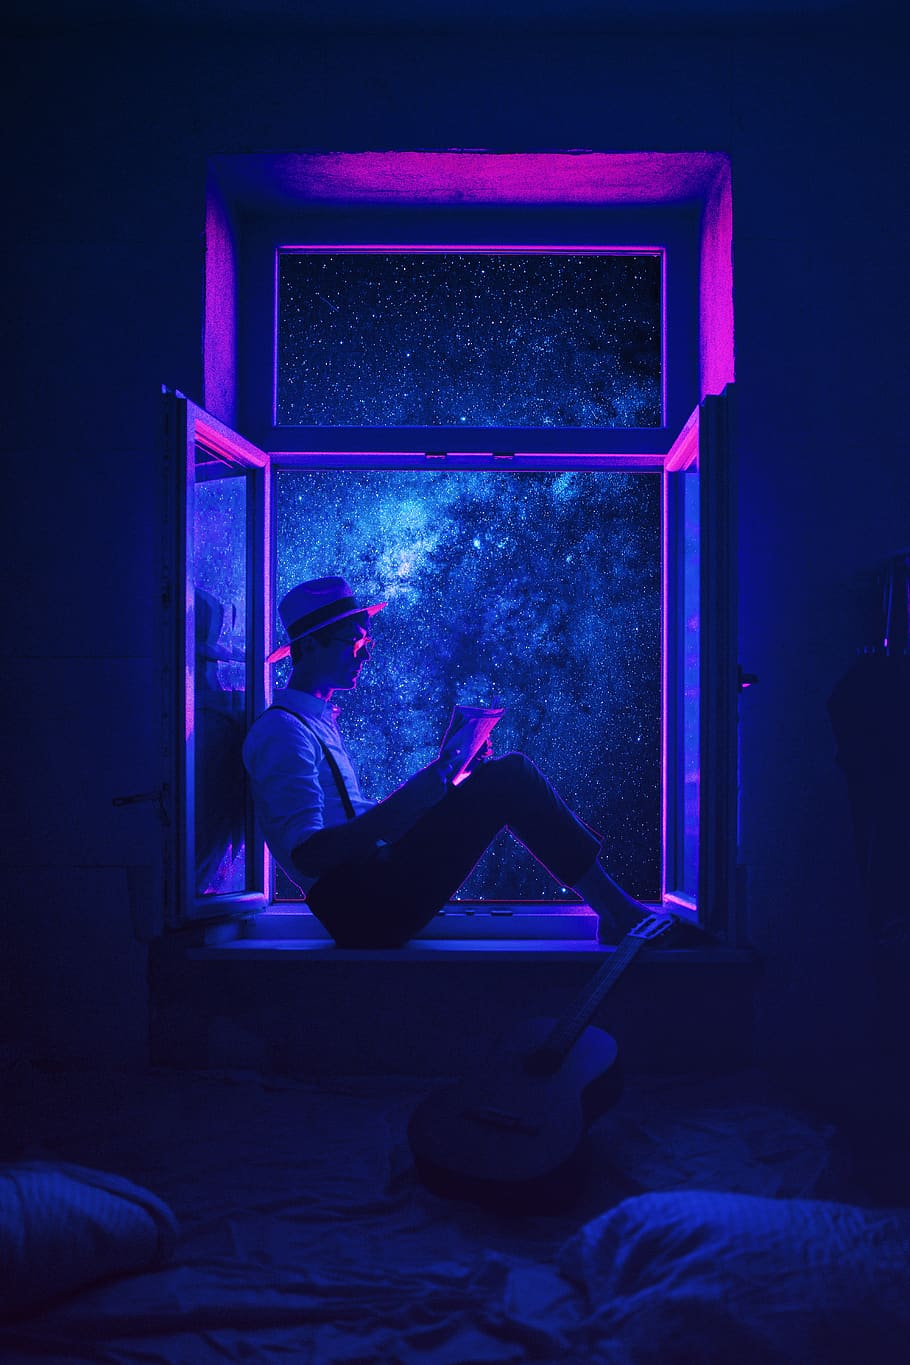 space, cyberpunk, reading, fantasy, sit on the window, bedroom, domestic room, one person, indoors, furniture